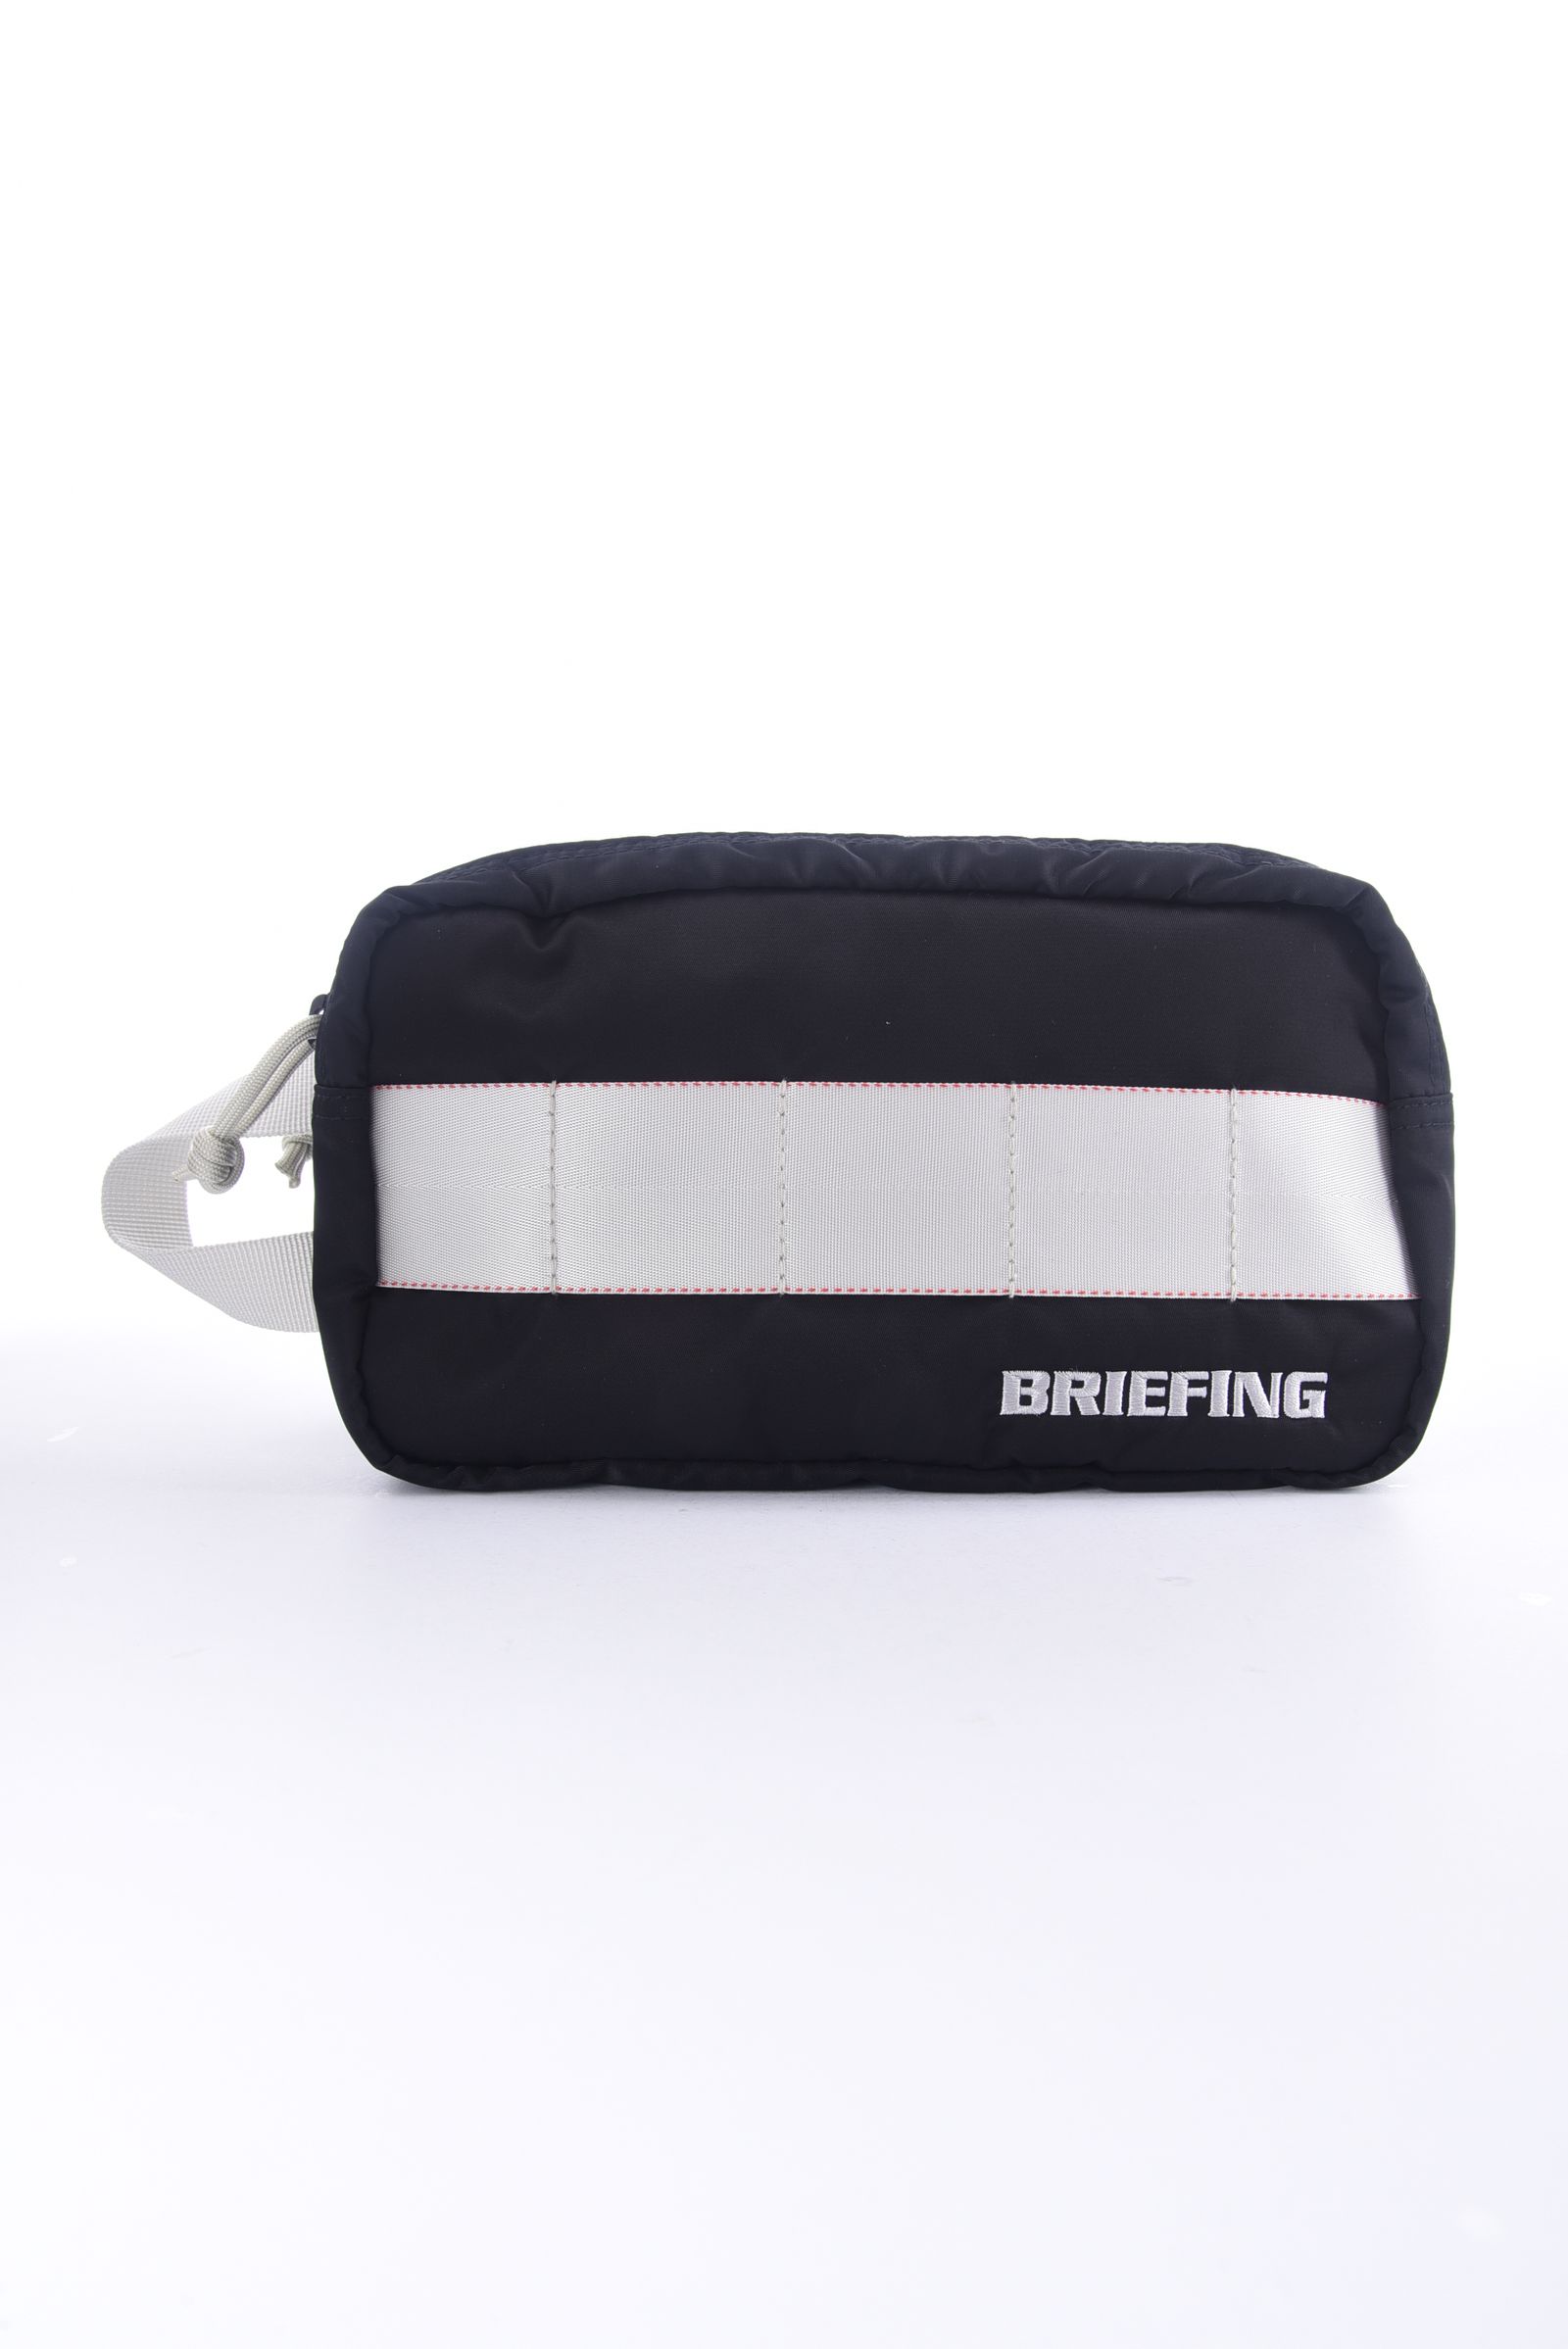 BRIEFING - 【HOLIDAY COLLECTION】 DOUBLE ZIP POUCH GOLF HOLIDAY 